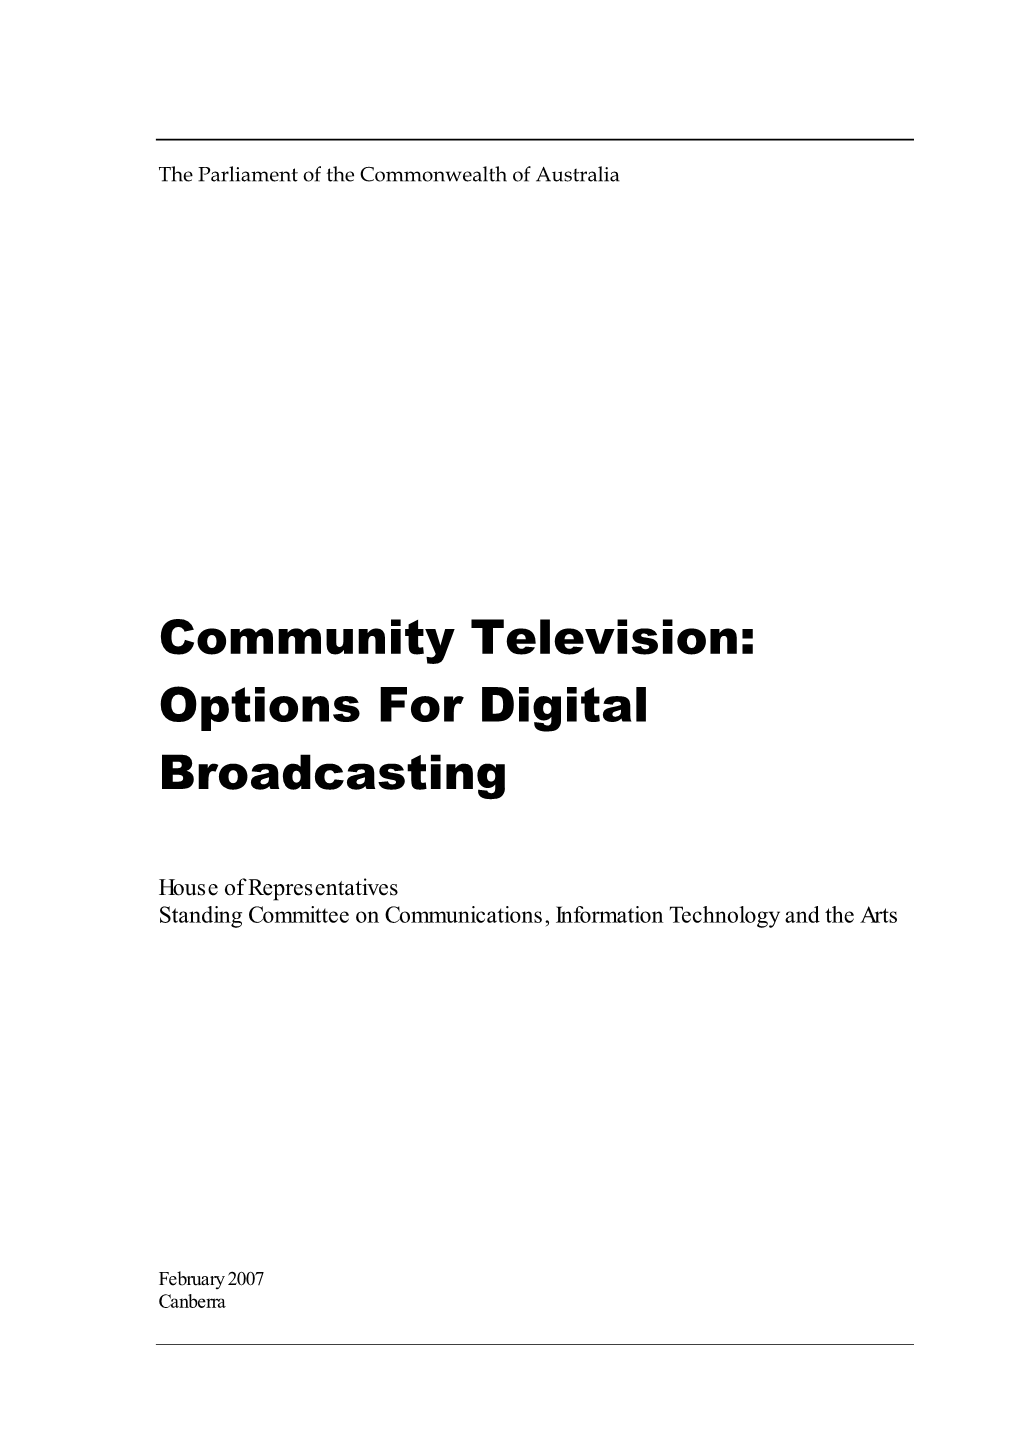 Community Television: Options for Digital Broadcasting